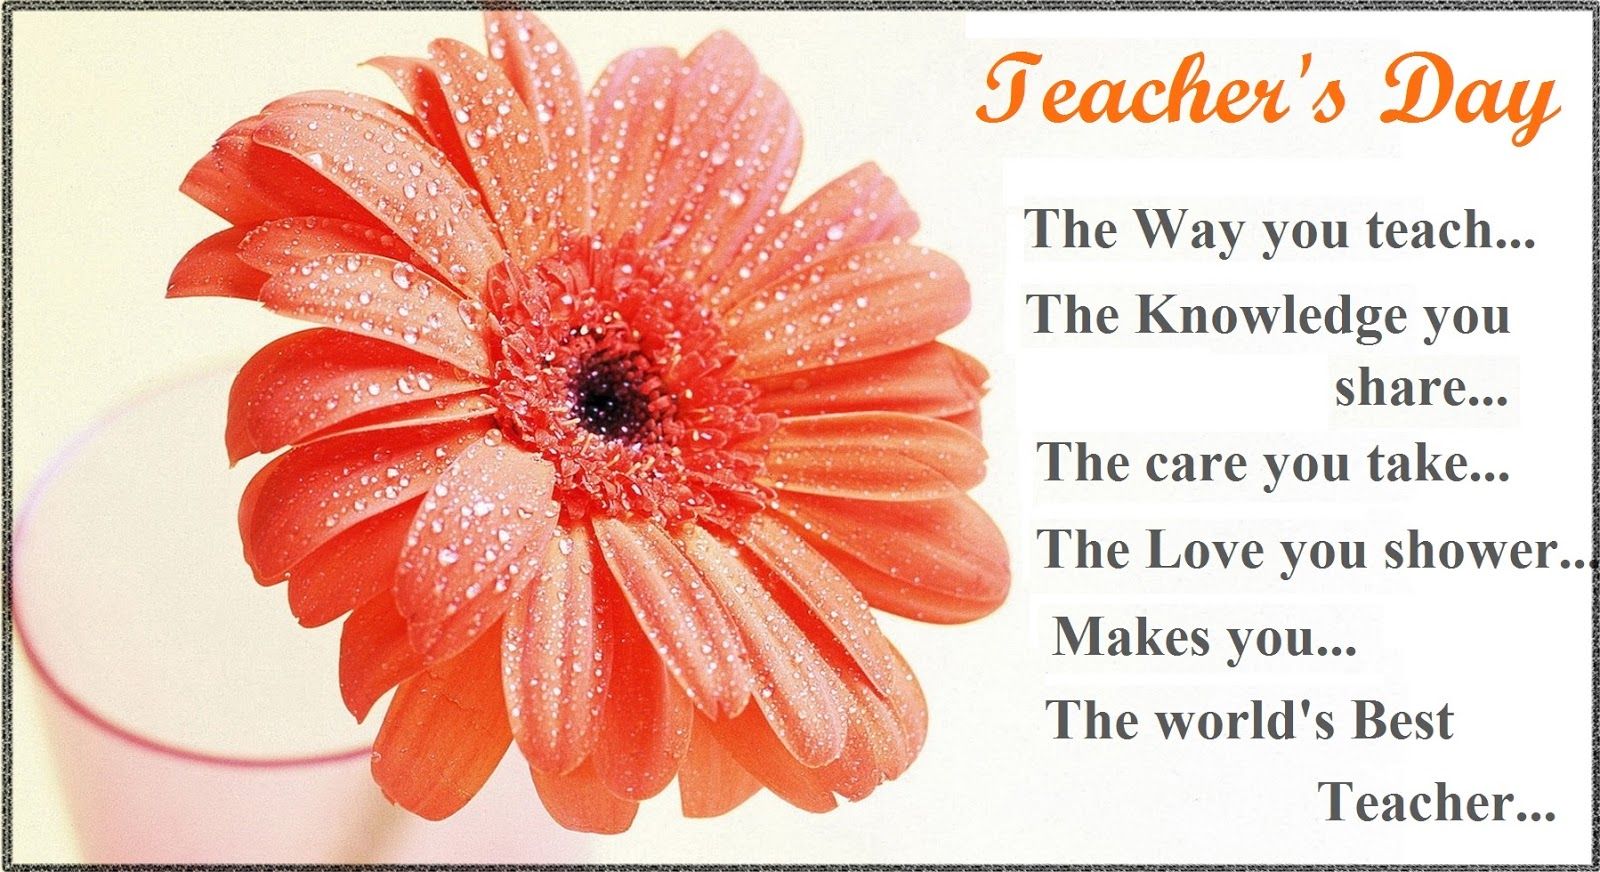 2021! Happy Teachers Day Quotes, Wishes, SMS, Greetings & DP